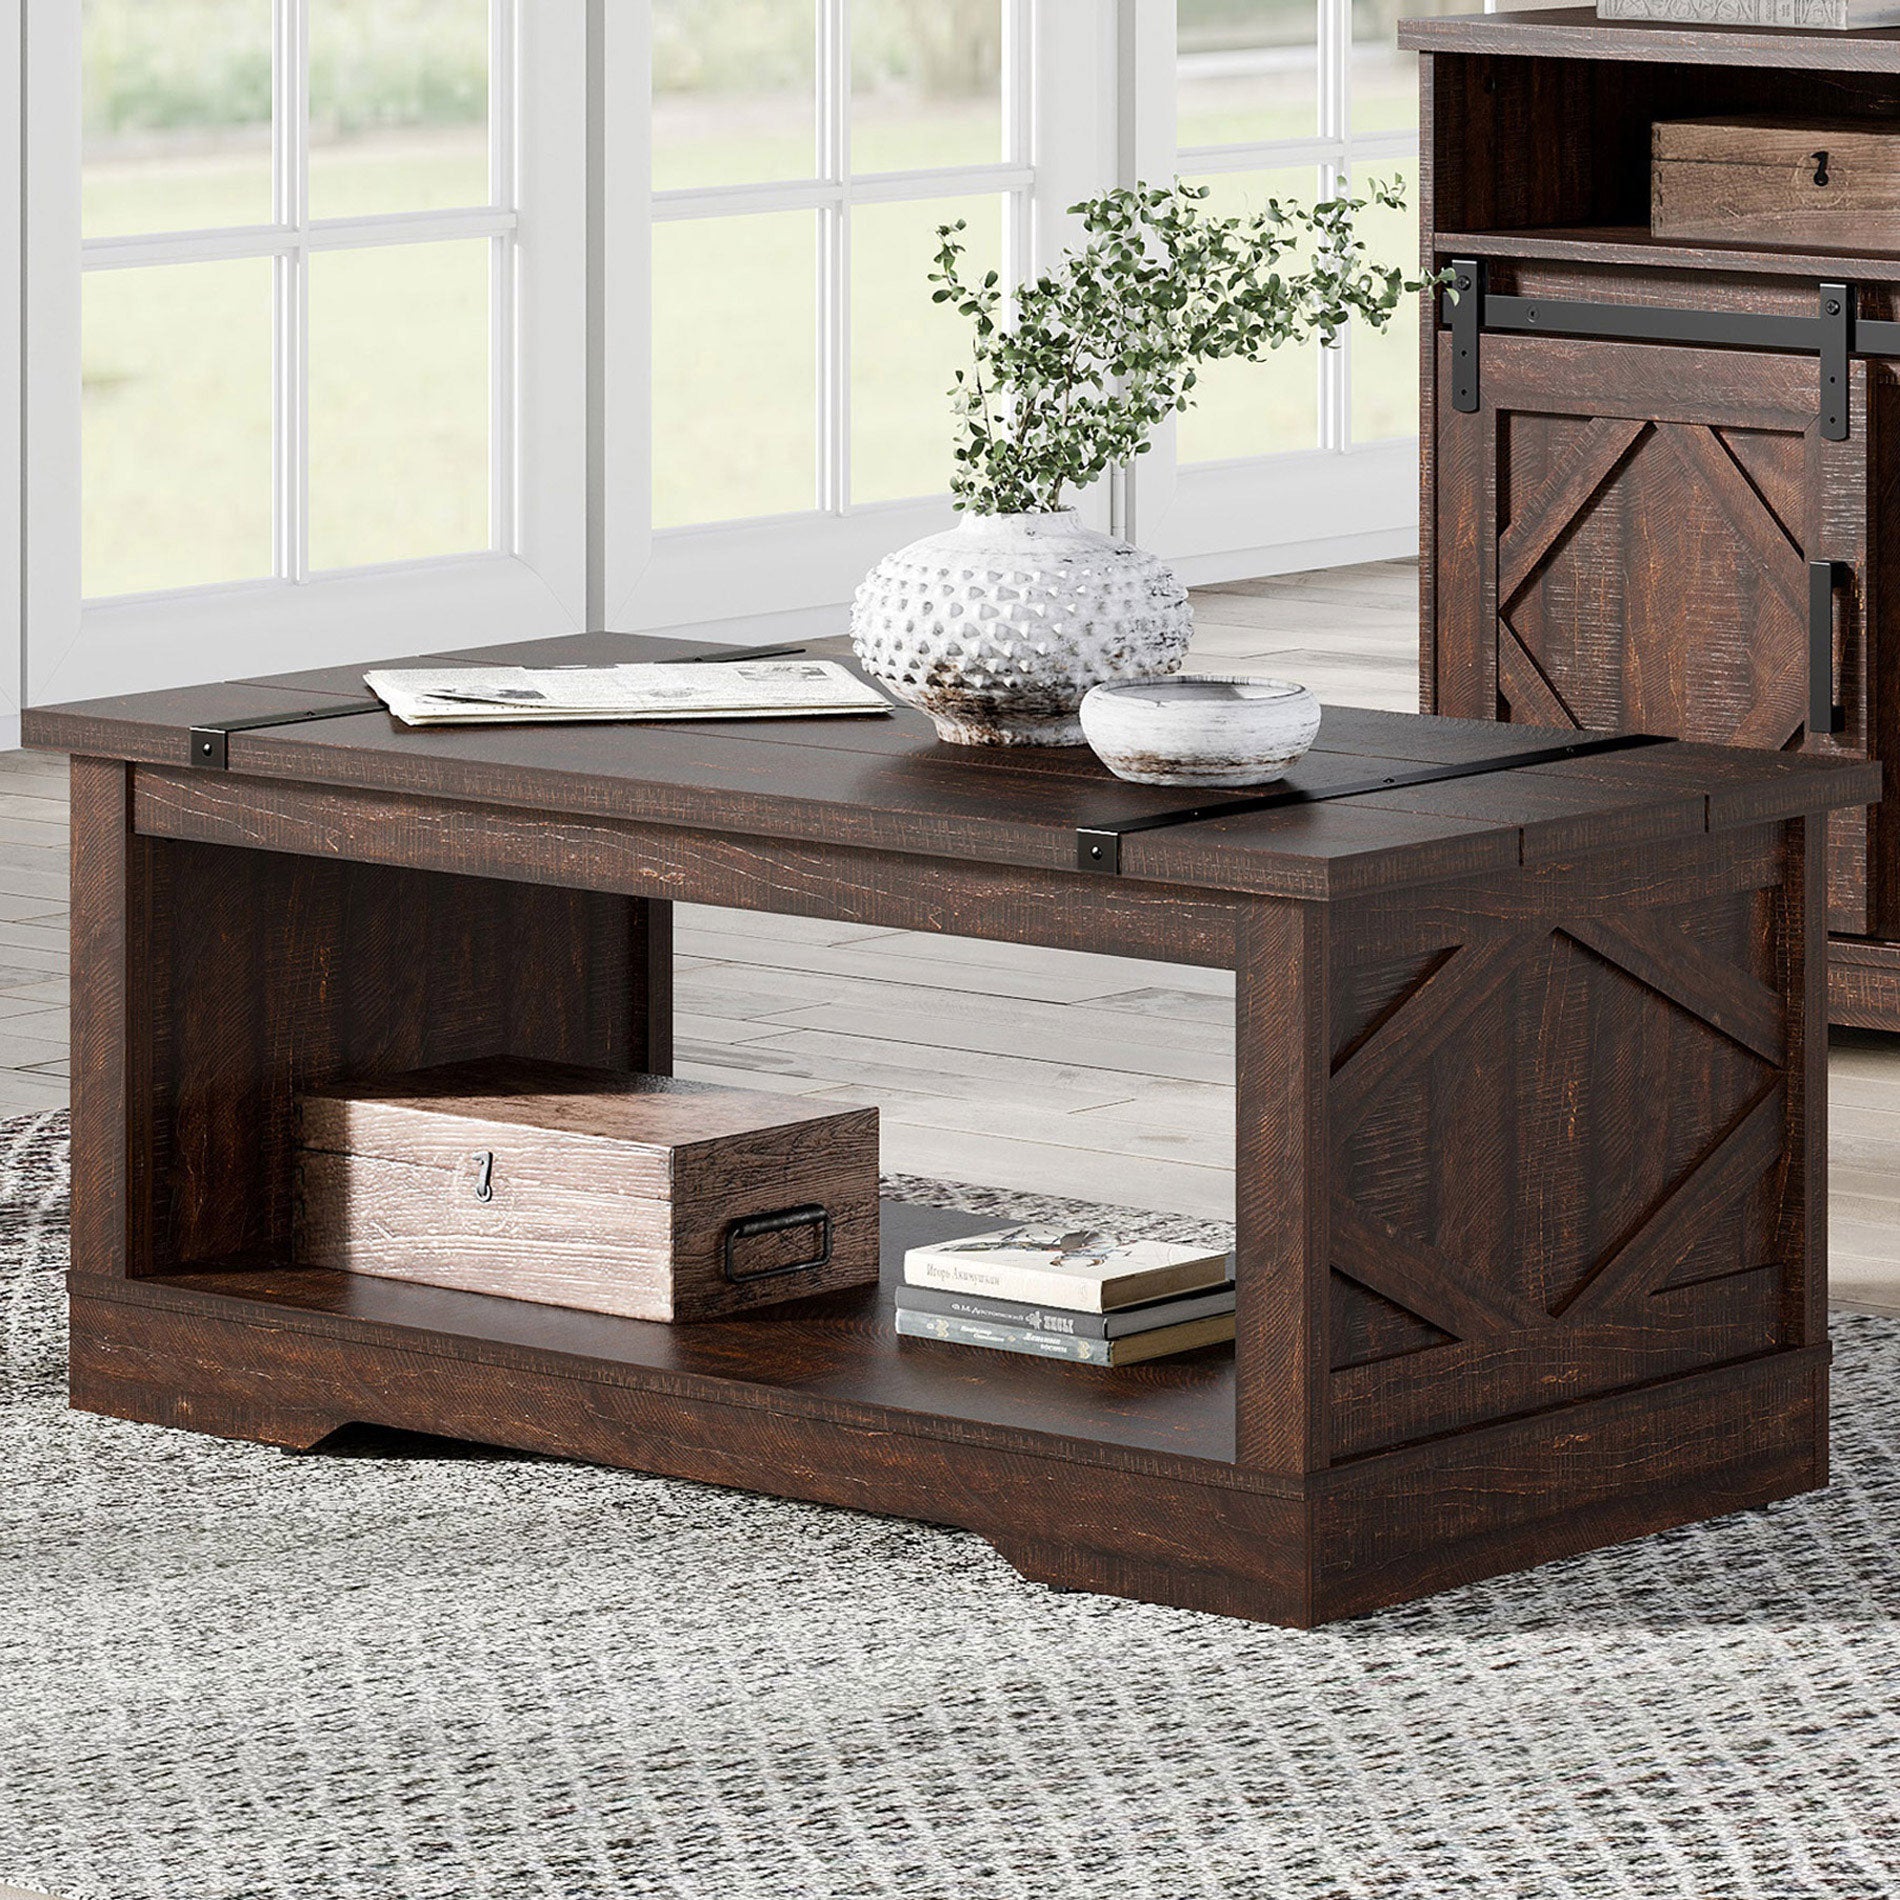 WAMPAT 42" Modern Farmhouse Coffee Table with Open Storage for Living Room, Rustic Brown